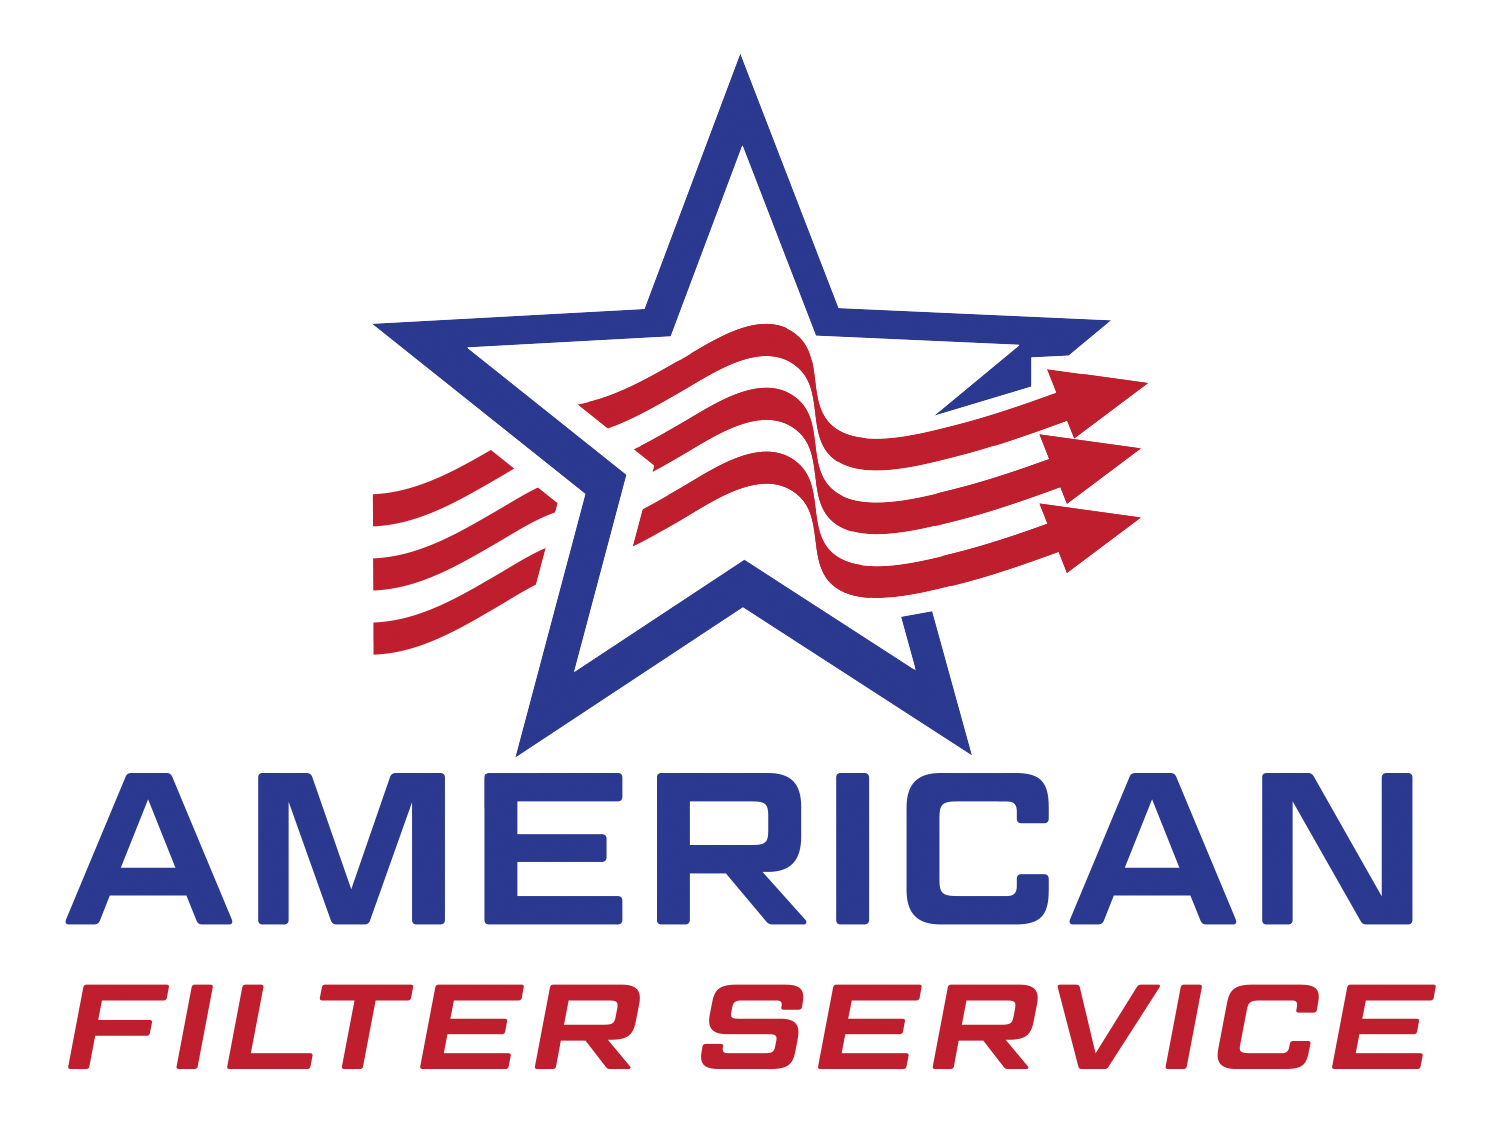 Local Filter Replacement Company & Filter Replacement Services, Lufkin &  Nacogdoches, TX